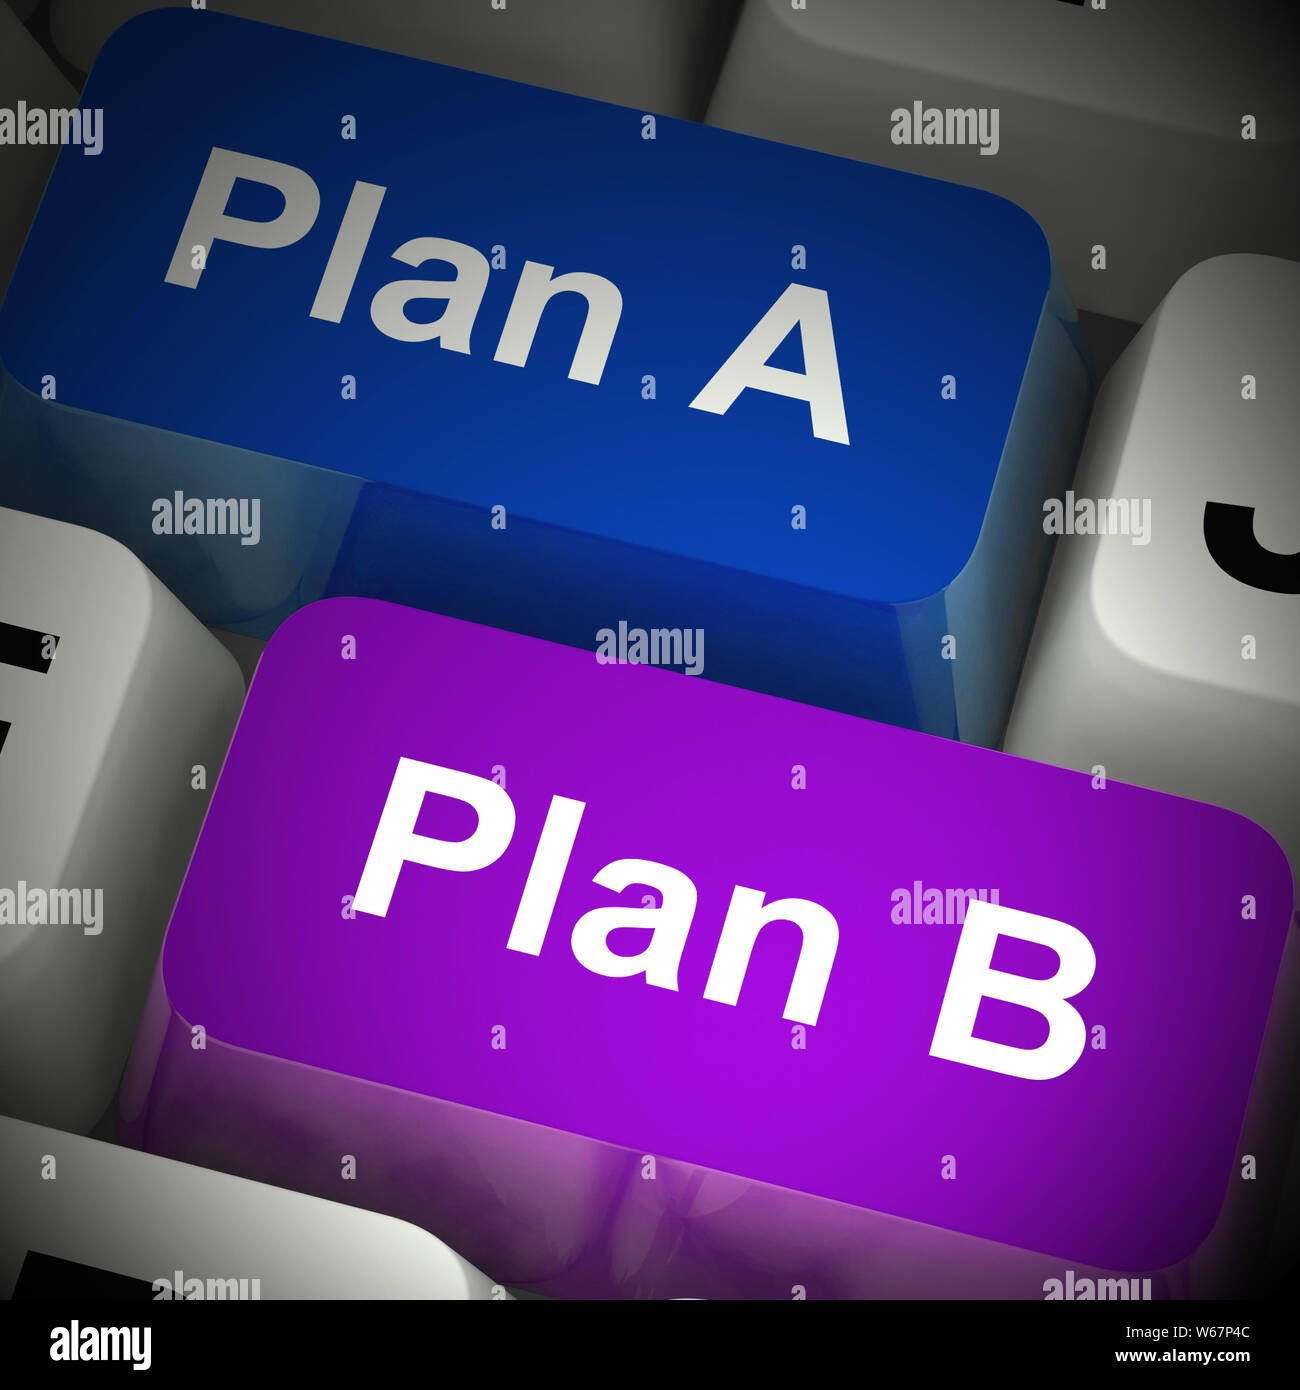 Plan B Means Alternative Planning Or Scheme To Be Prepared Arranging A